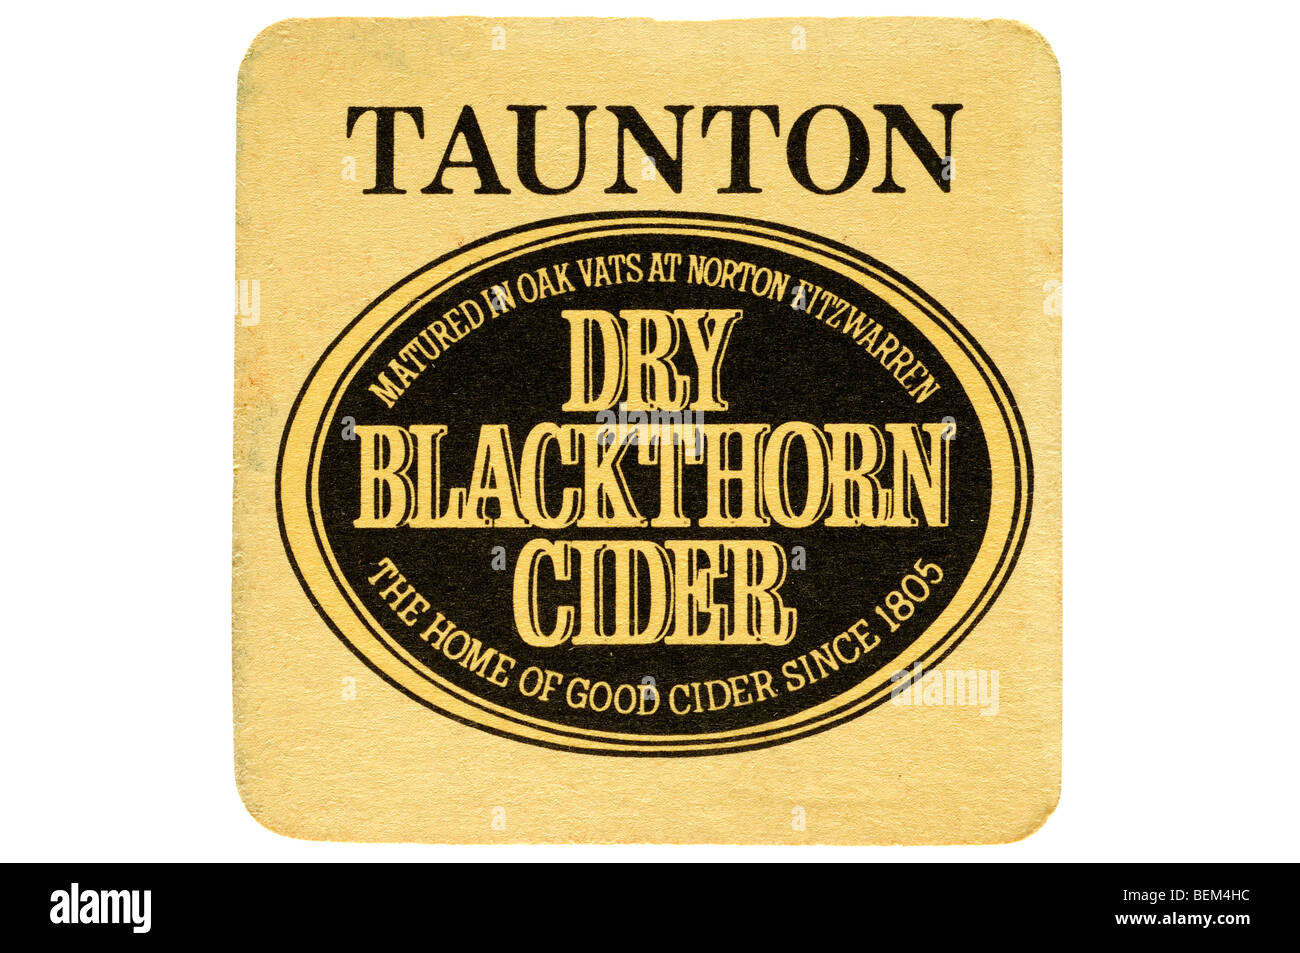 taunton matured in oak vats at norton fitzwarren dry blackthorn cider the home of good cider since 1805 Stock Photo